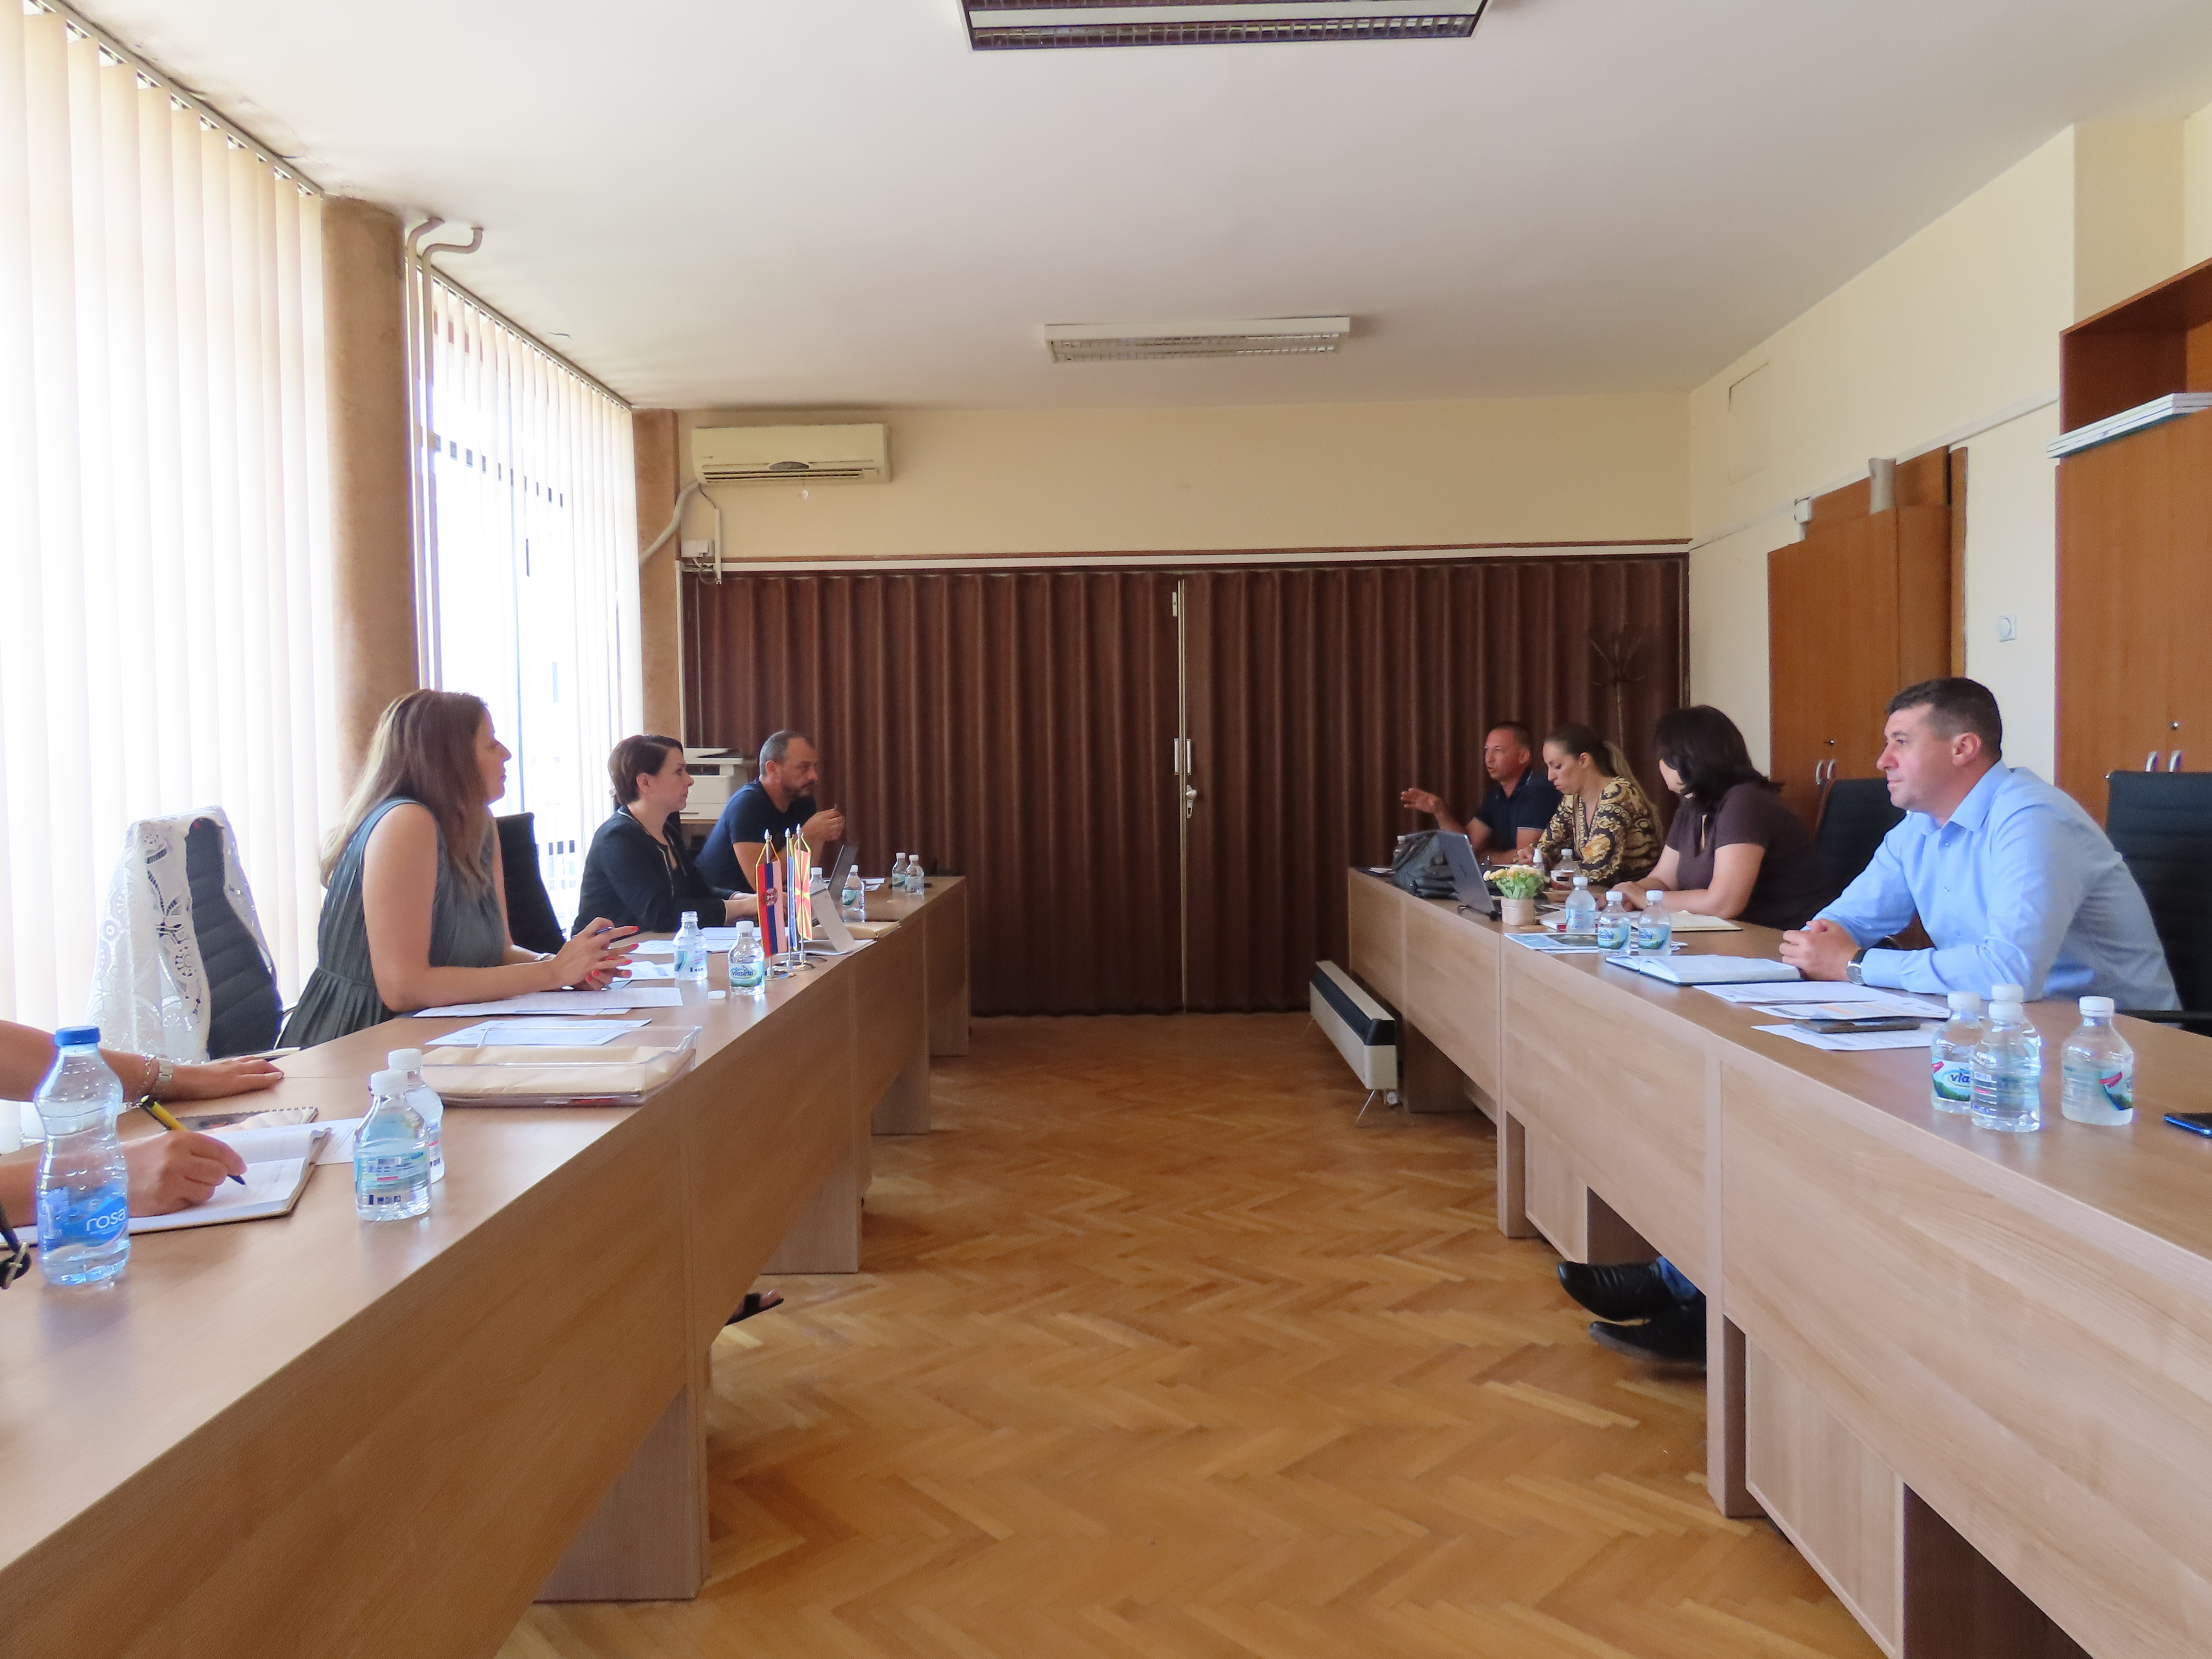 RS-MK cross-border initiative on opportunities for economic empowerment tailored to 5 municipalities in Serbia and North Macedonia